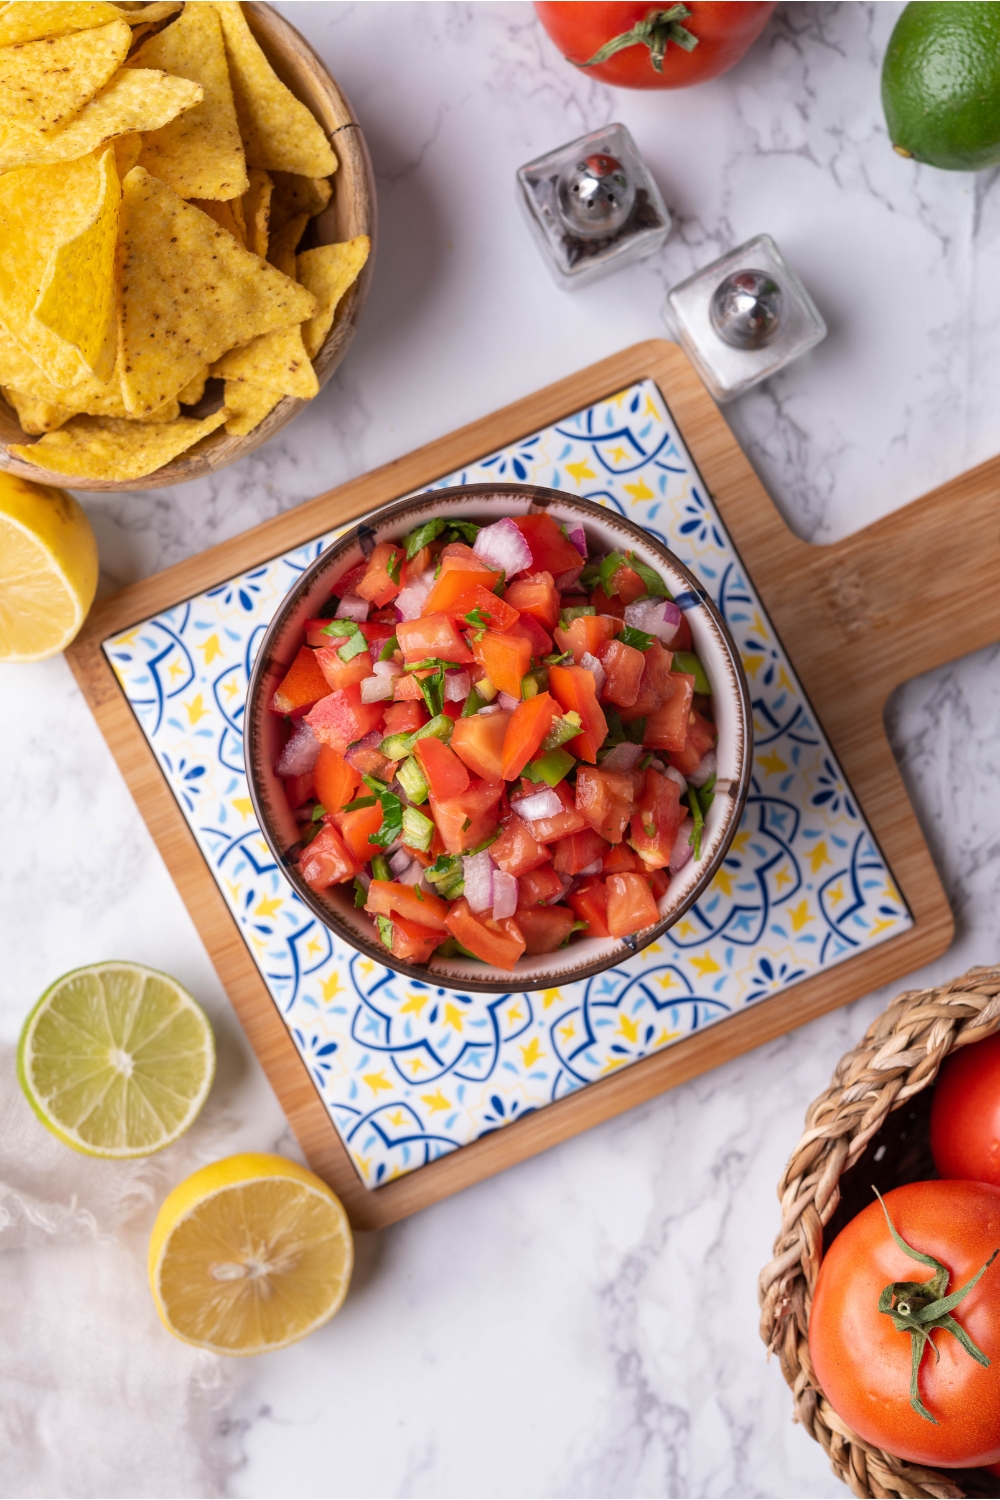 Overview of fresh tomato salsa on a decorative serving tray, surrounded by lemons, limes, tortilla chips, and salt and pepper shakers.